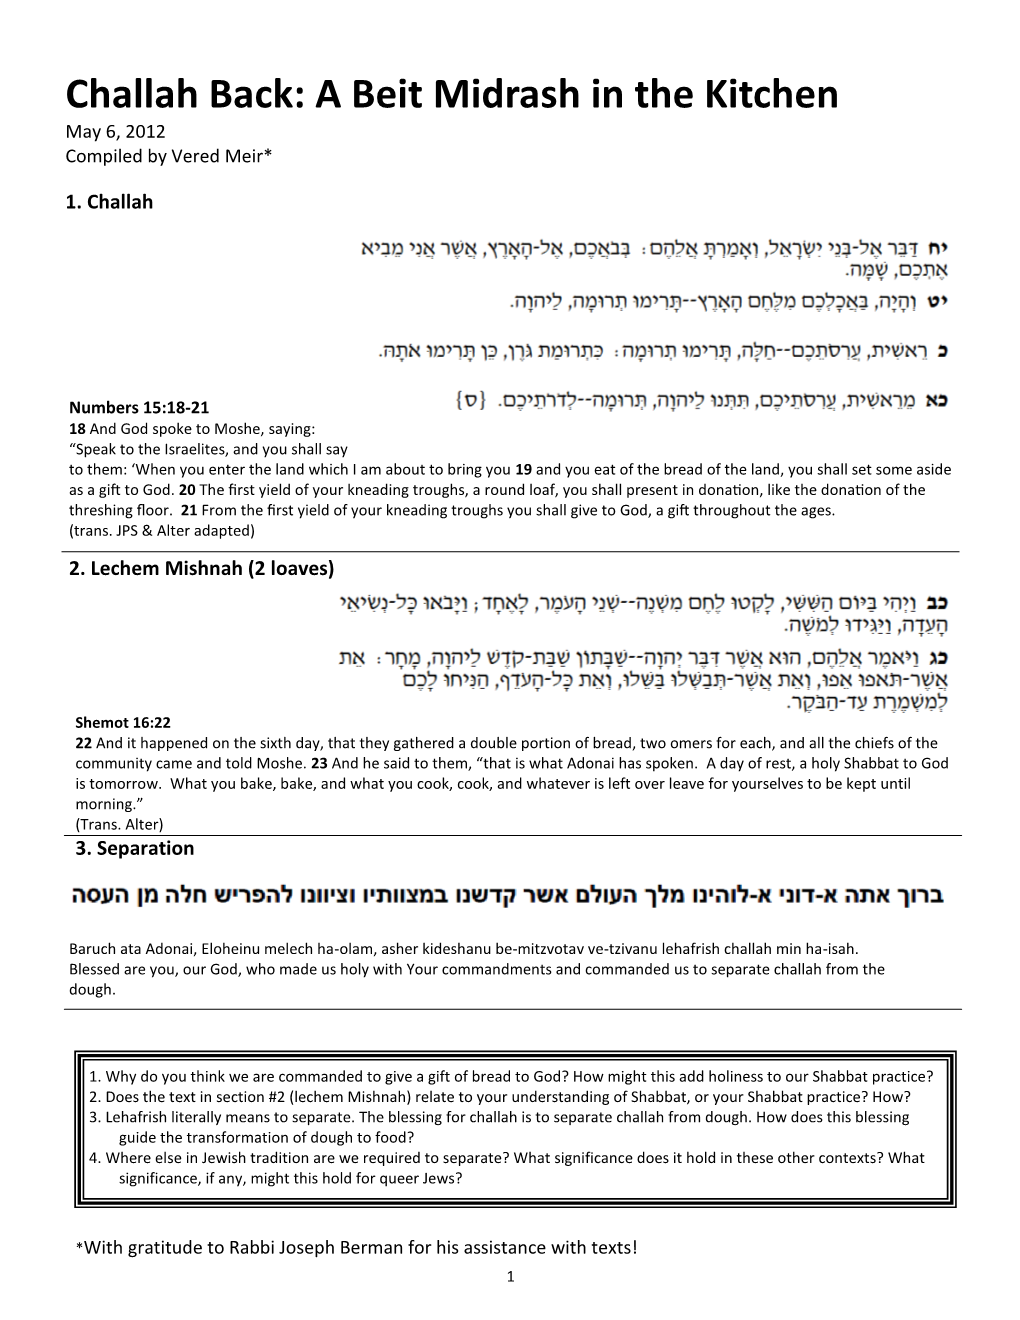 Challah Back: a Beit Midrash in the Kitchen May 6, 2012 Compiled by Vered Meir*